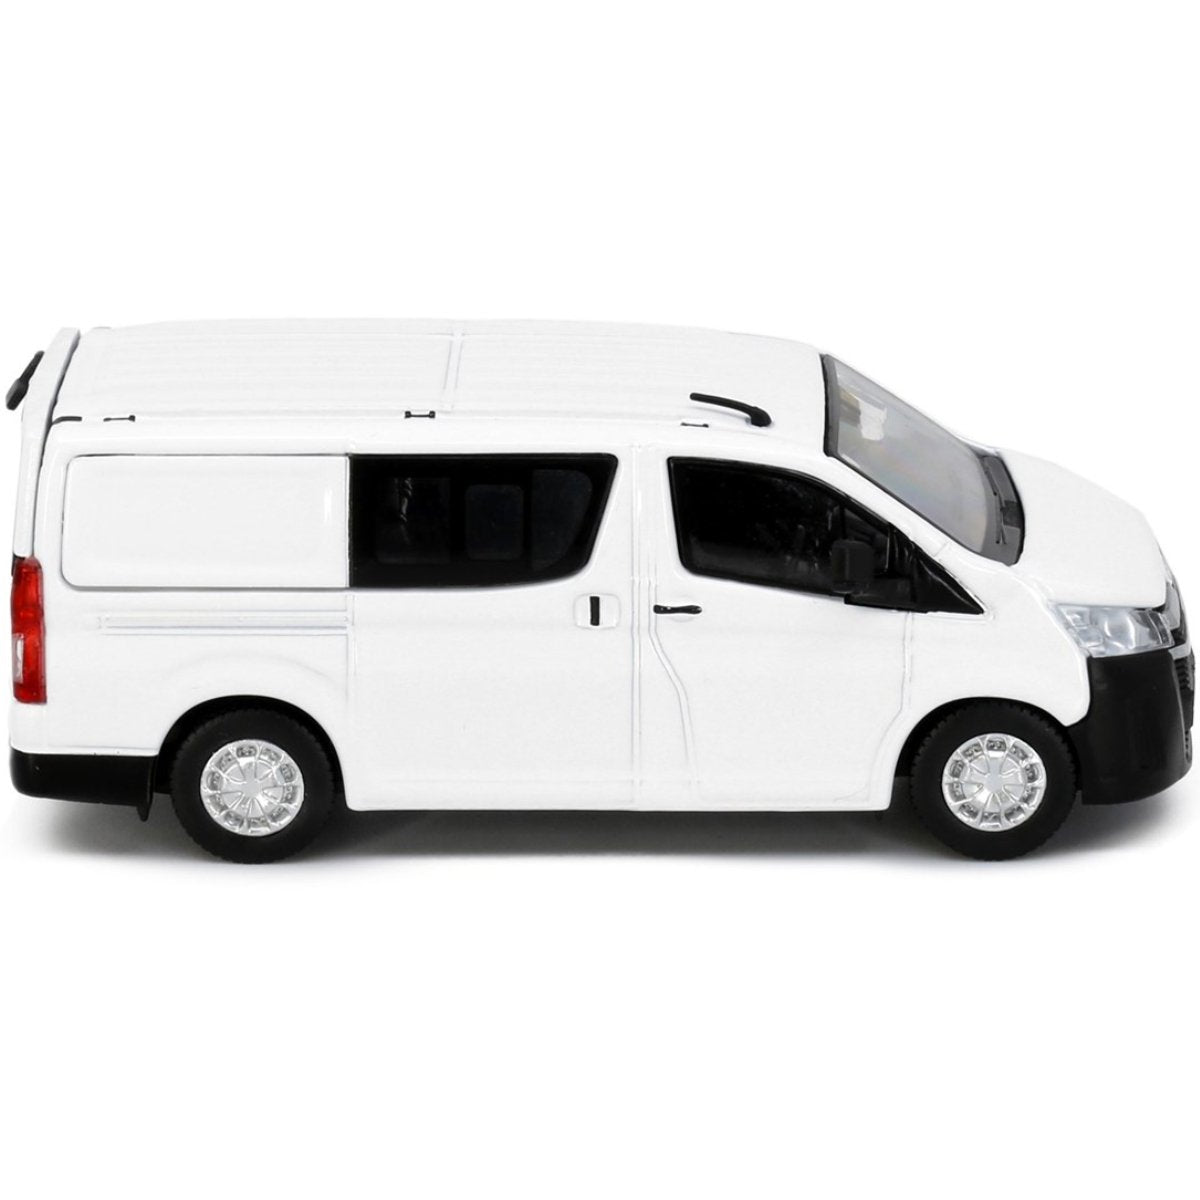 Tiny Models Toyota Hiace H300 White (1:64 Scale) - Phillips Hobbies